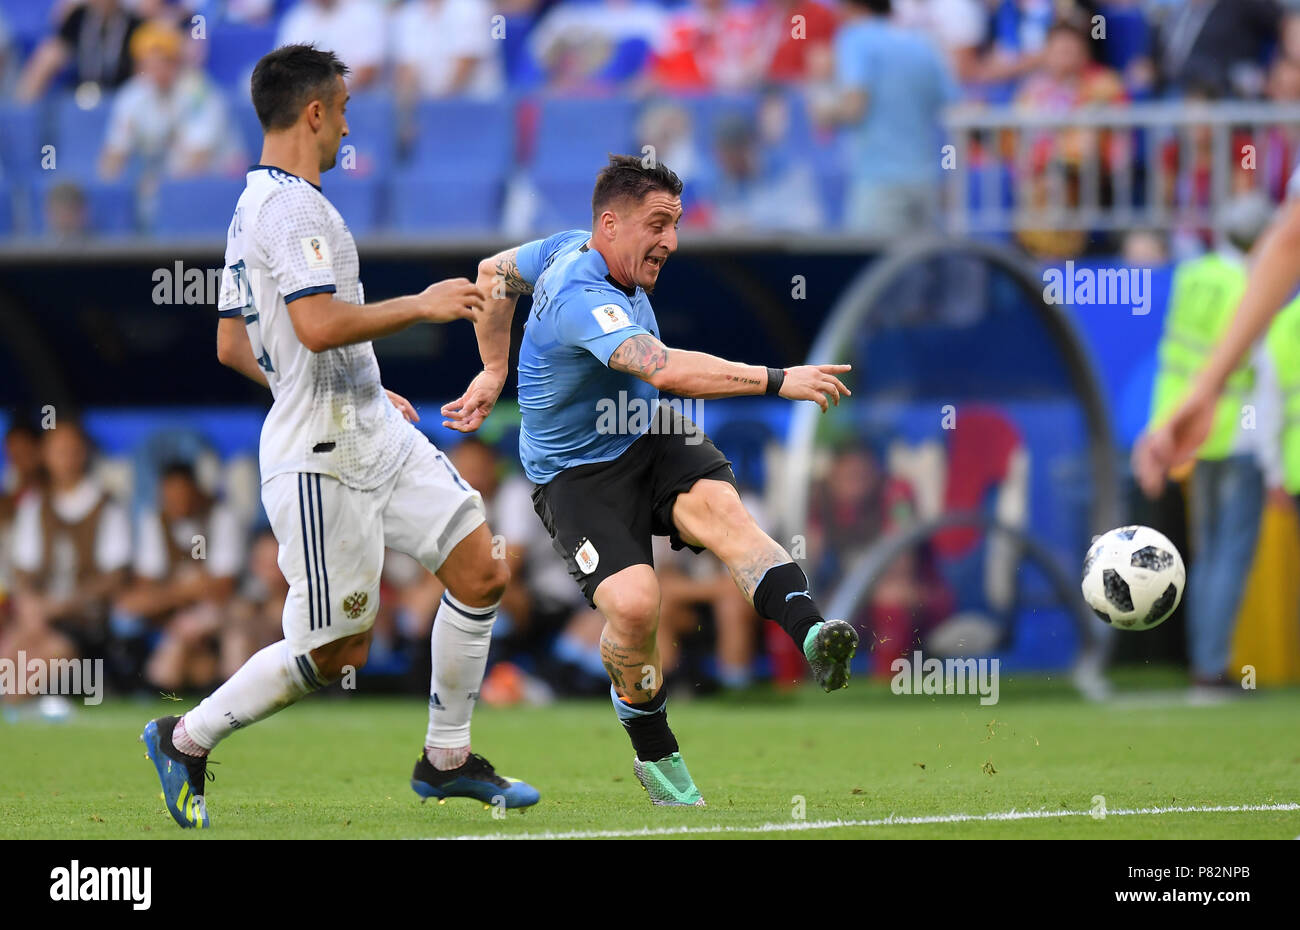 SAMARA, RUSSIA - JUNE 25: Cristian Rodriguez of Uruguay takes a shot on goal during the 2018 FIFA World Cup Russia group A match between Uruguay and Russia at Samara Arena on June 25, 2018 in Samara, Russia. (Photo by Lukasz Laskowski/PressFocus/MB Media) Stock Photo